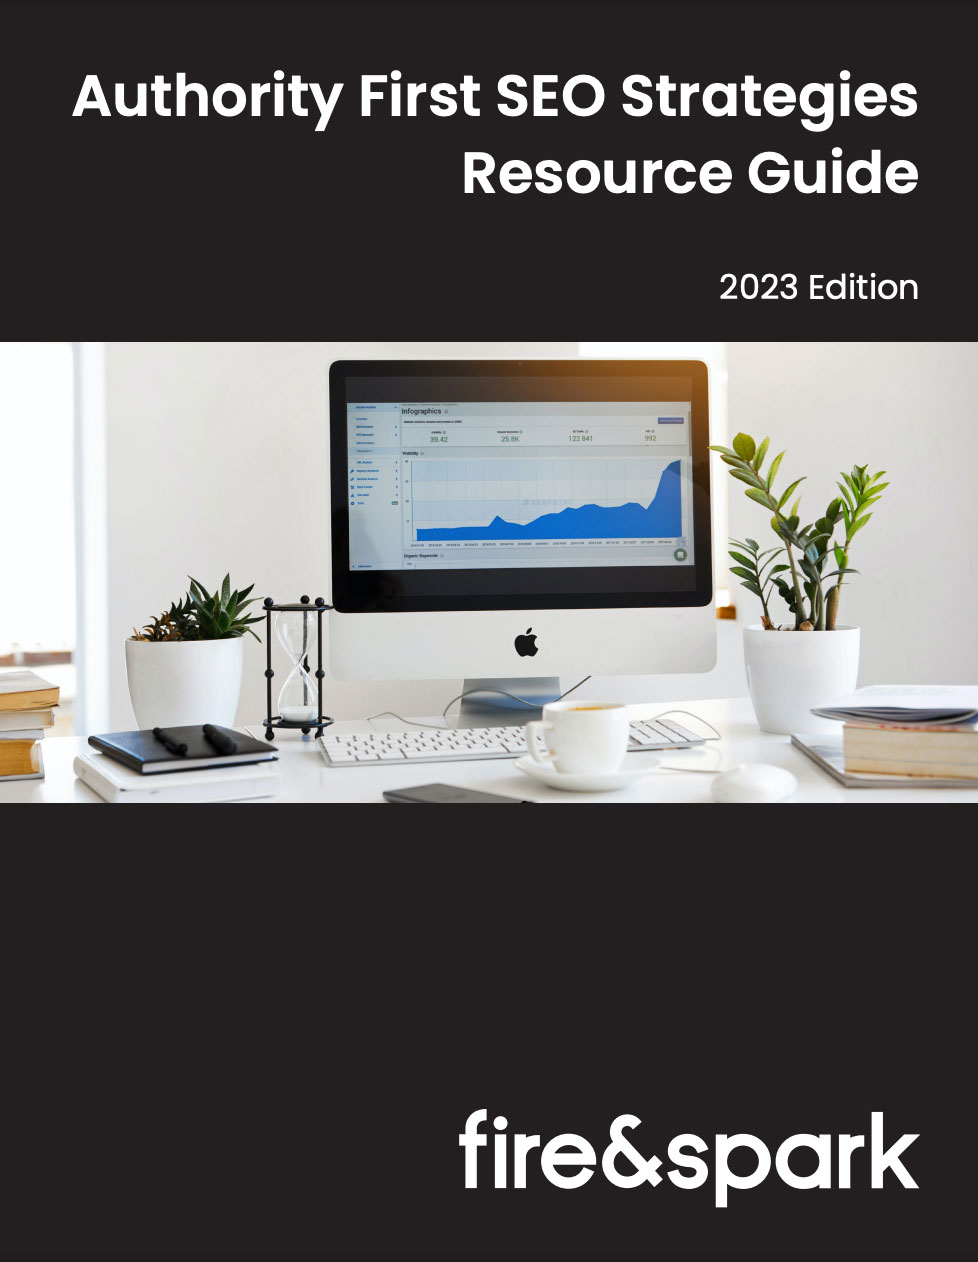 Authority First SEO Strategies Resource Guide 2023